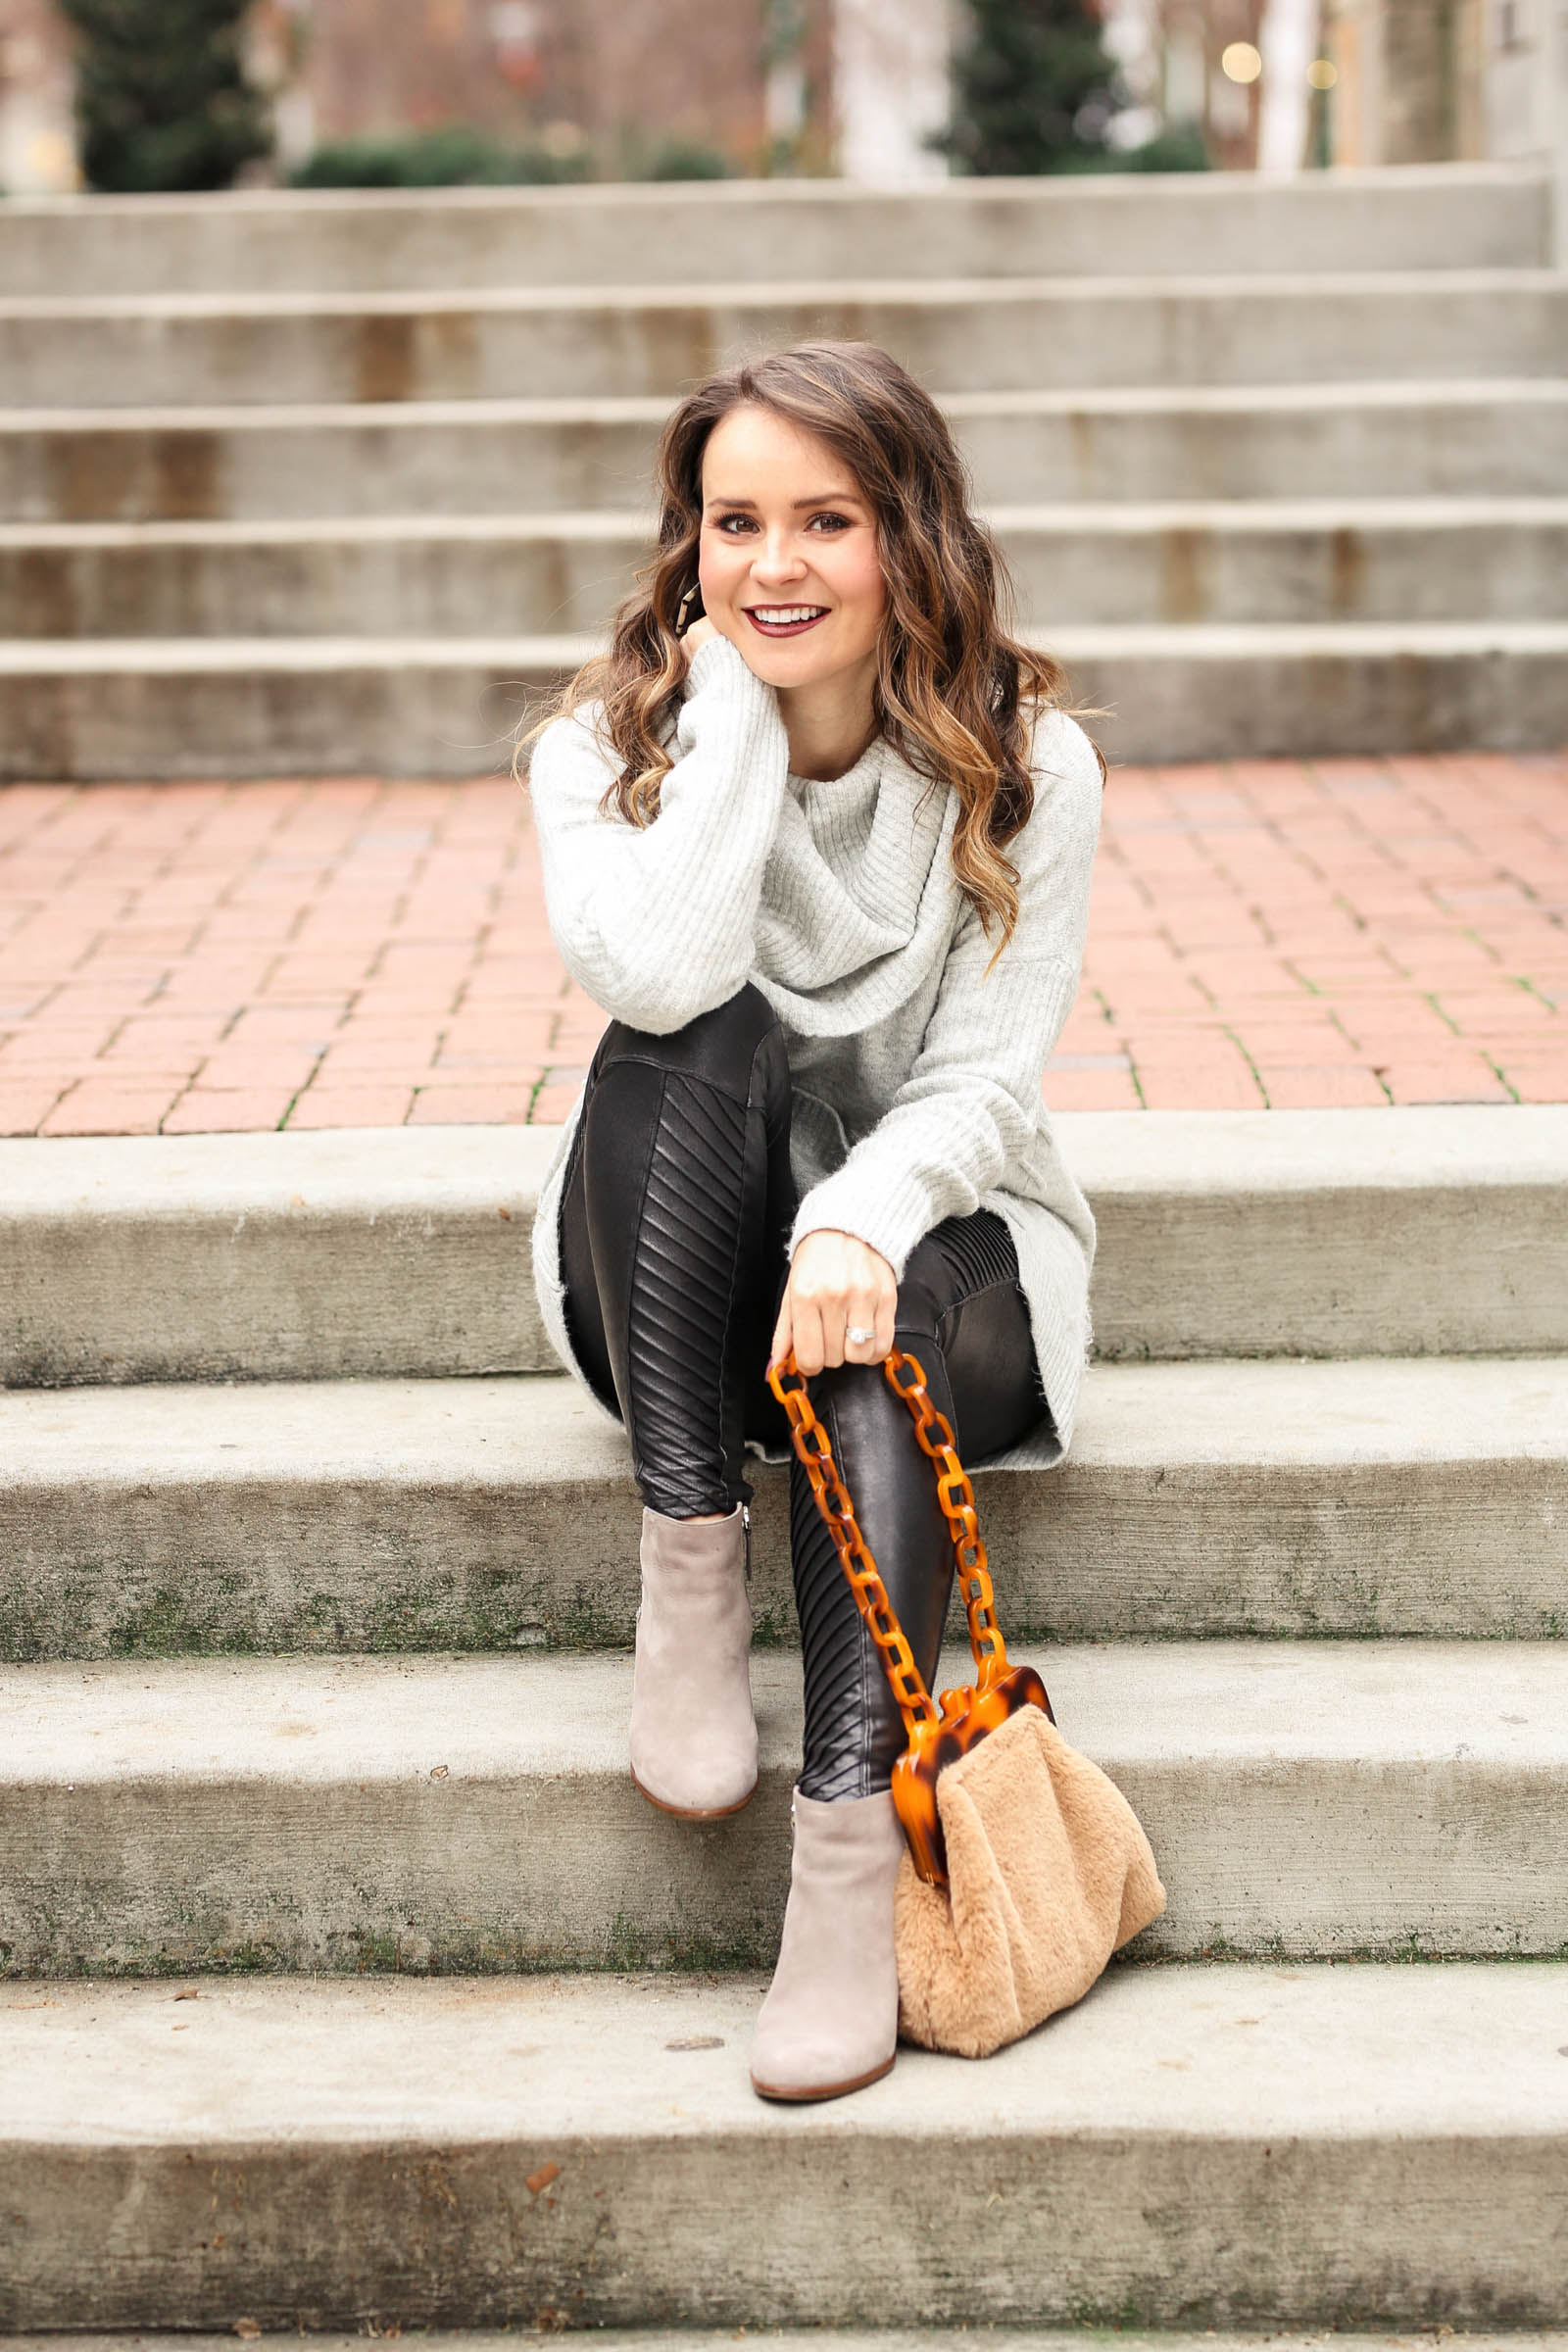 How to Style Faux Leather Leggings - Walking in Memphis in High Heels